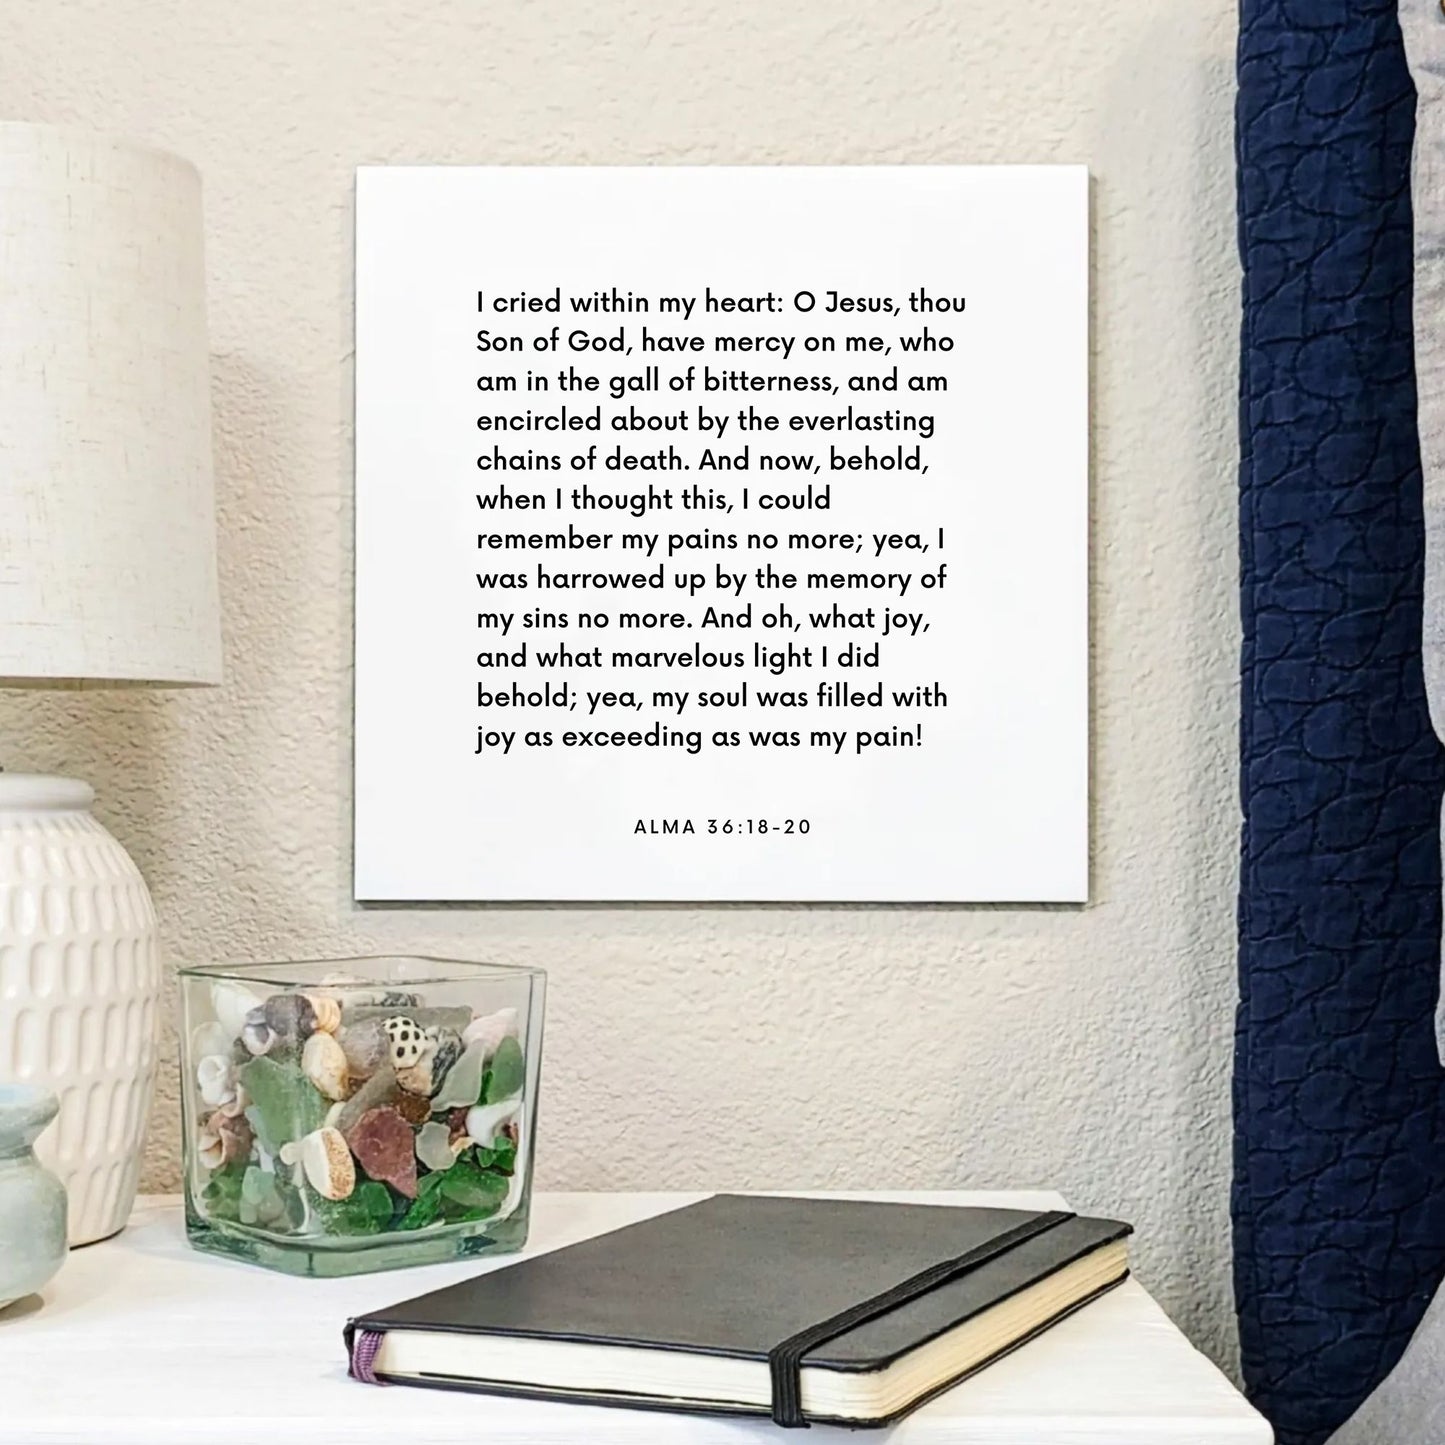 Bedside mouting of the scripture tile for Alma 36:18-20 - "I could remember my pains no more"